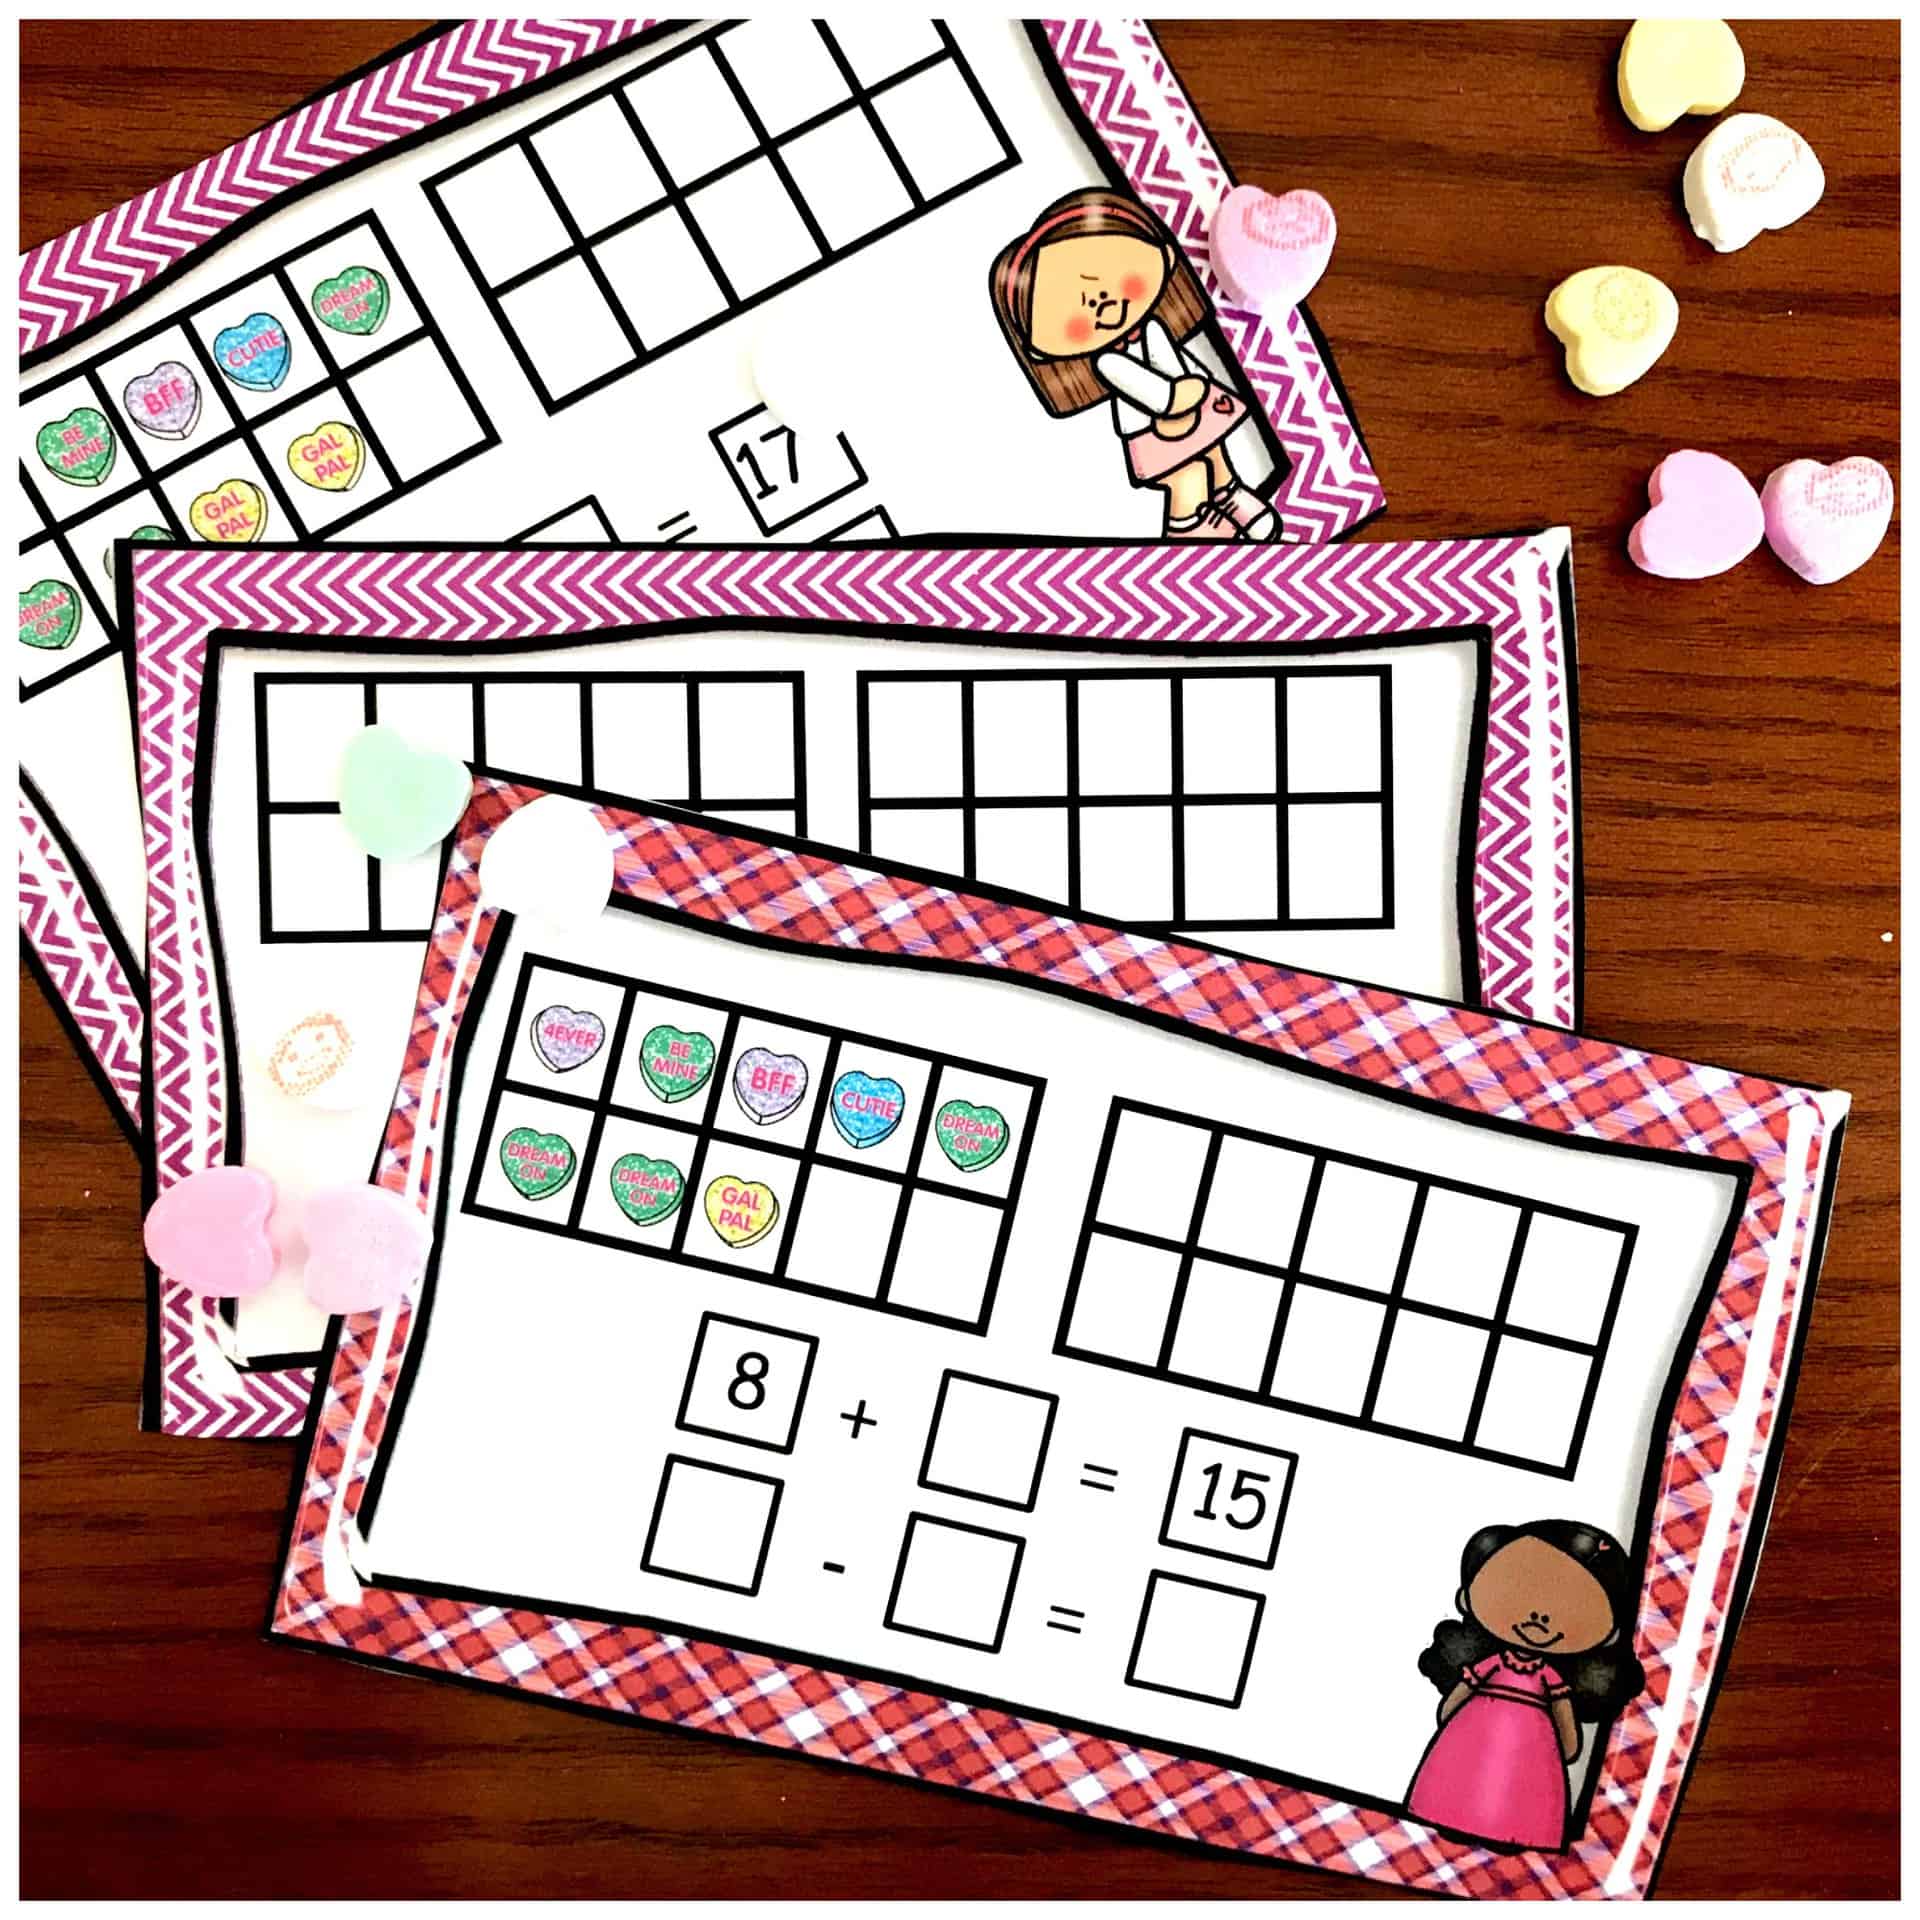 Fun, Hands-On Task Cards For Teaching Missing Numbers in Equations